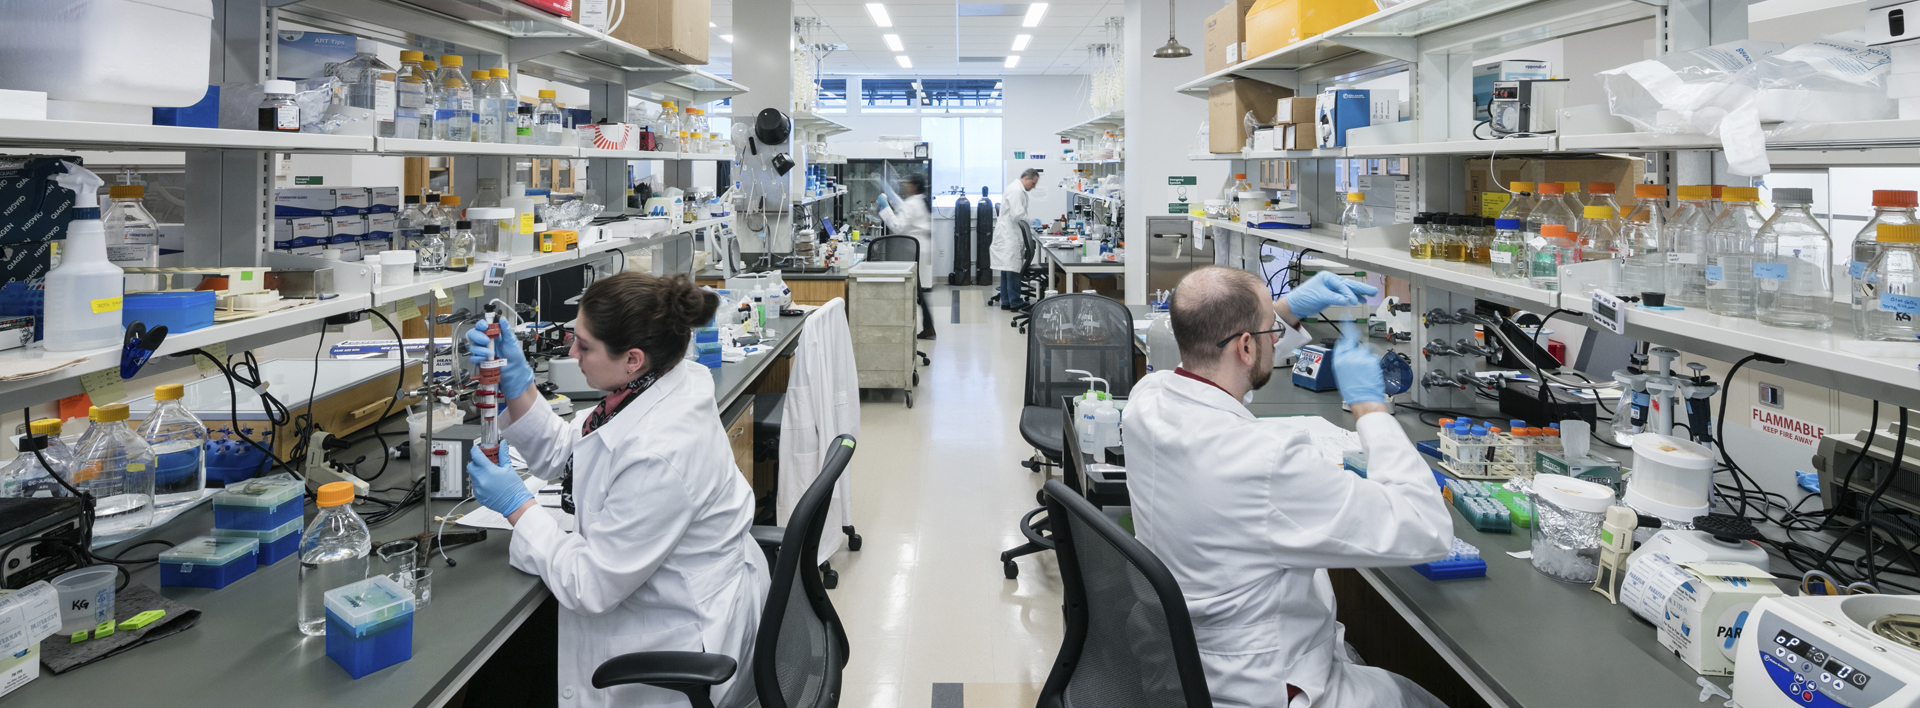 researchers in lab coats and gloves working in a lab